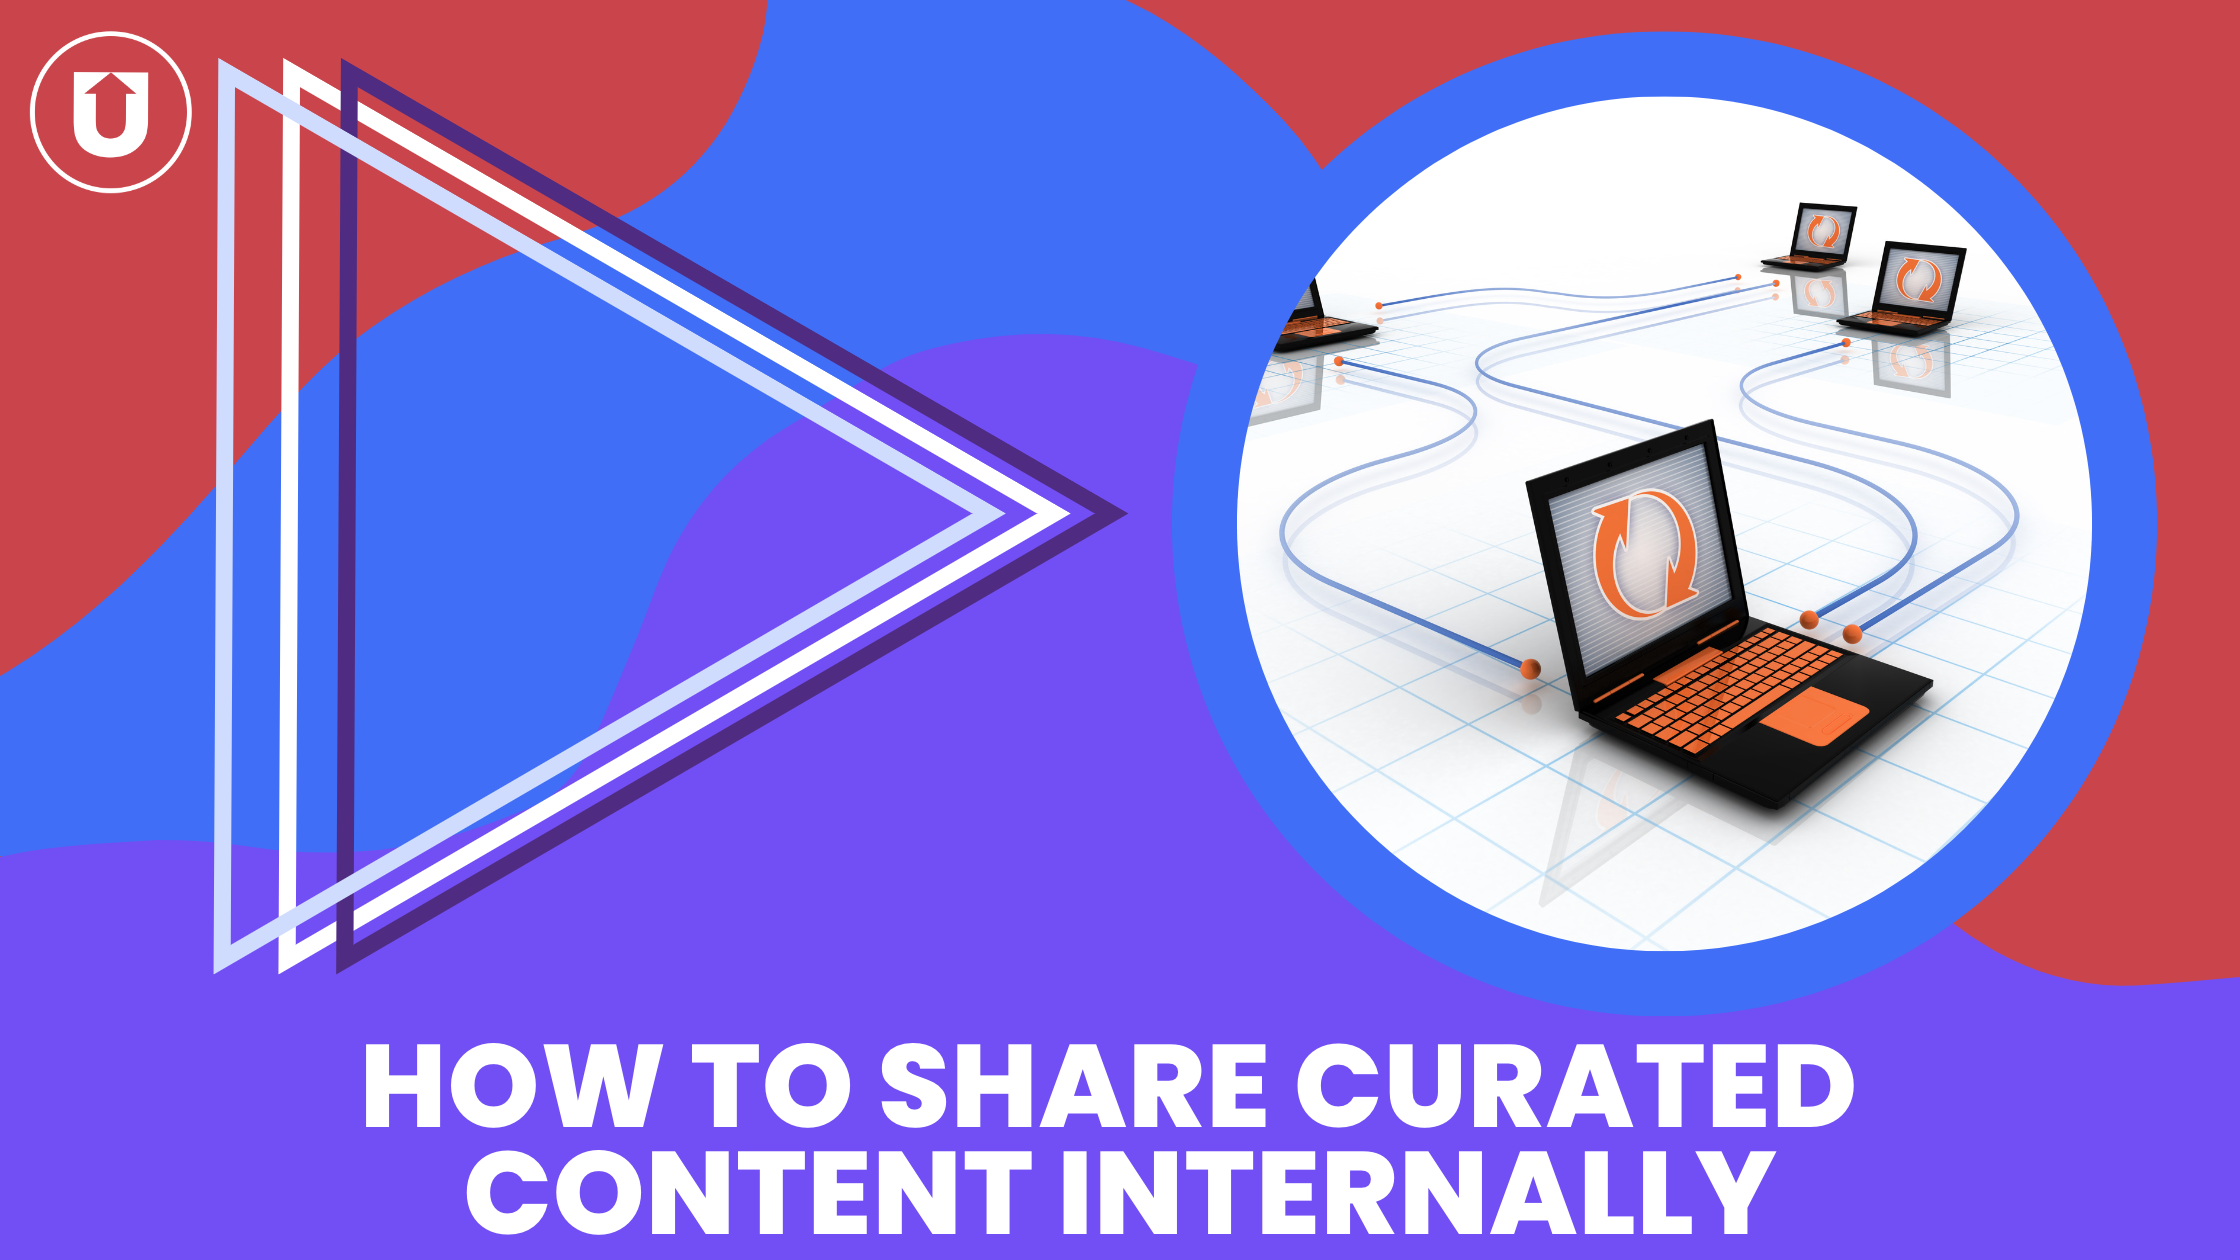 63cef3c4dd72f22da6155299_how to share curated content internally blog graphic